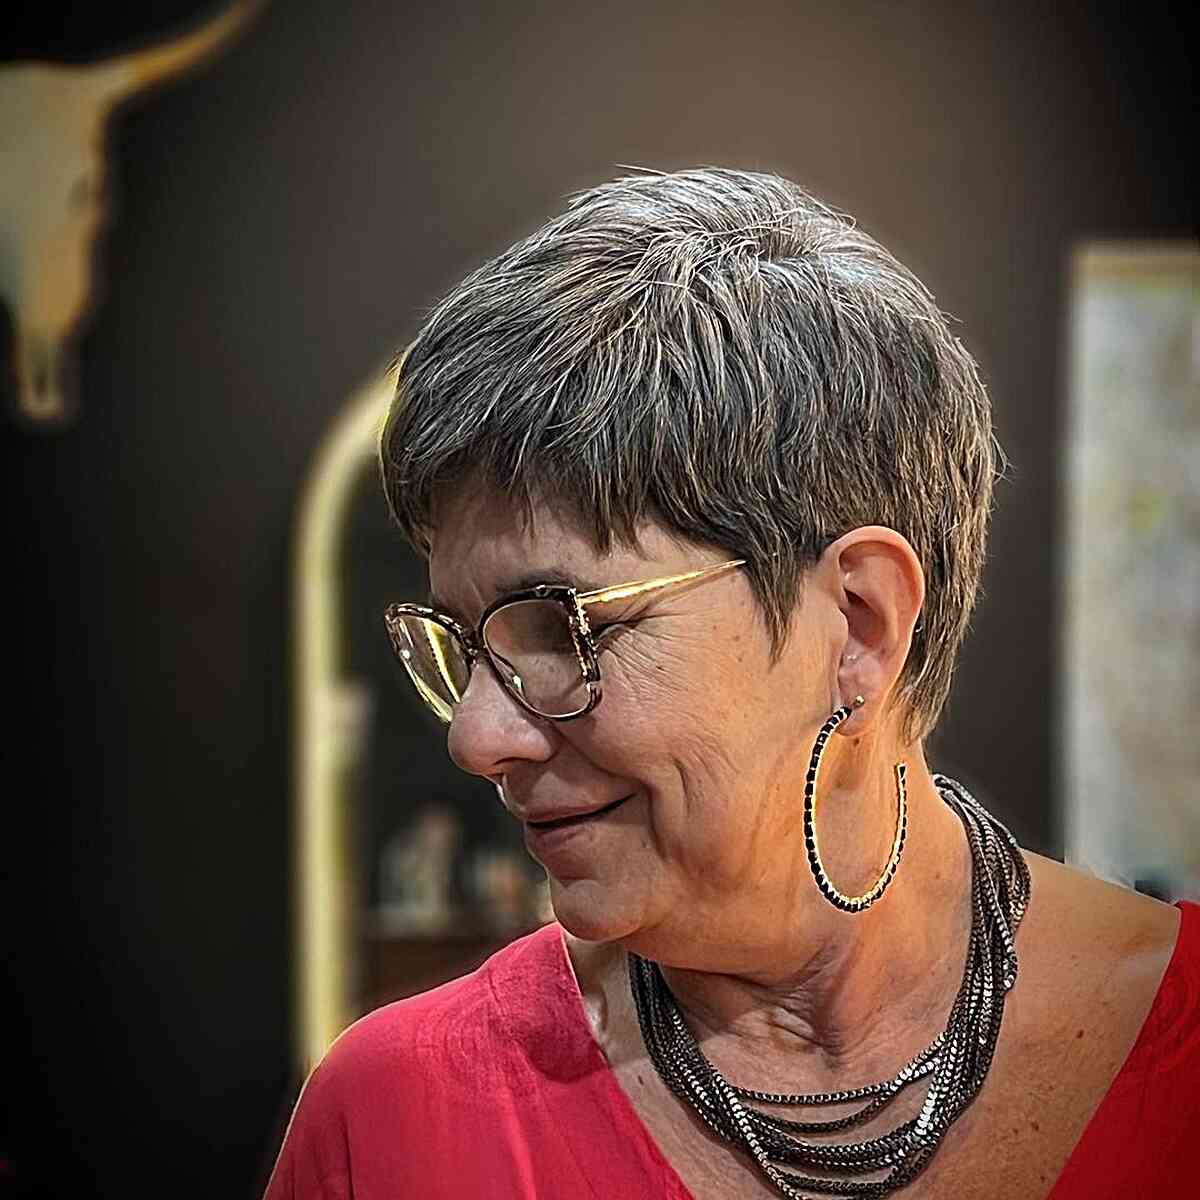 Chic Pixie Cut with Grey Balayage for Ladies Aged 60 with Eyeglasses